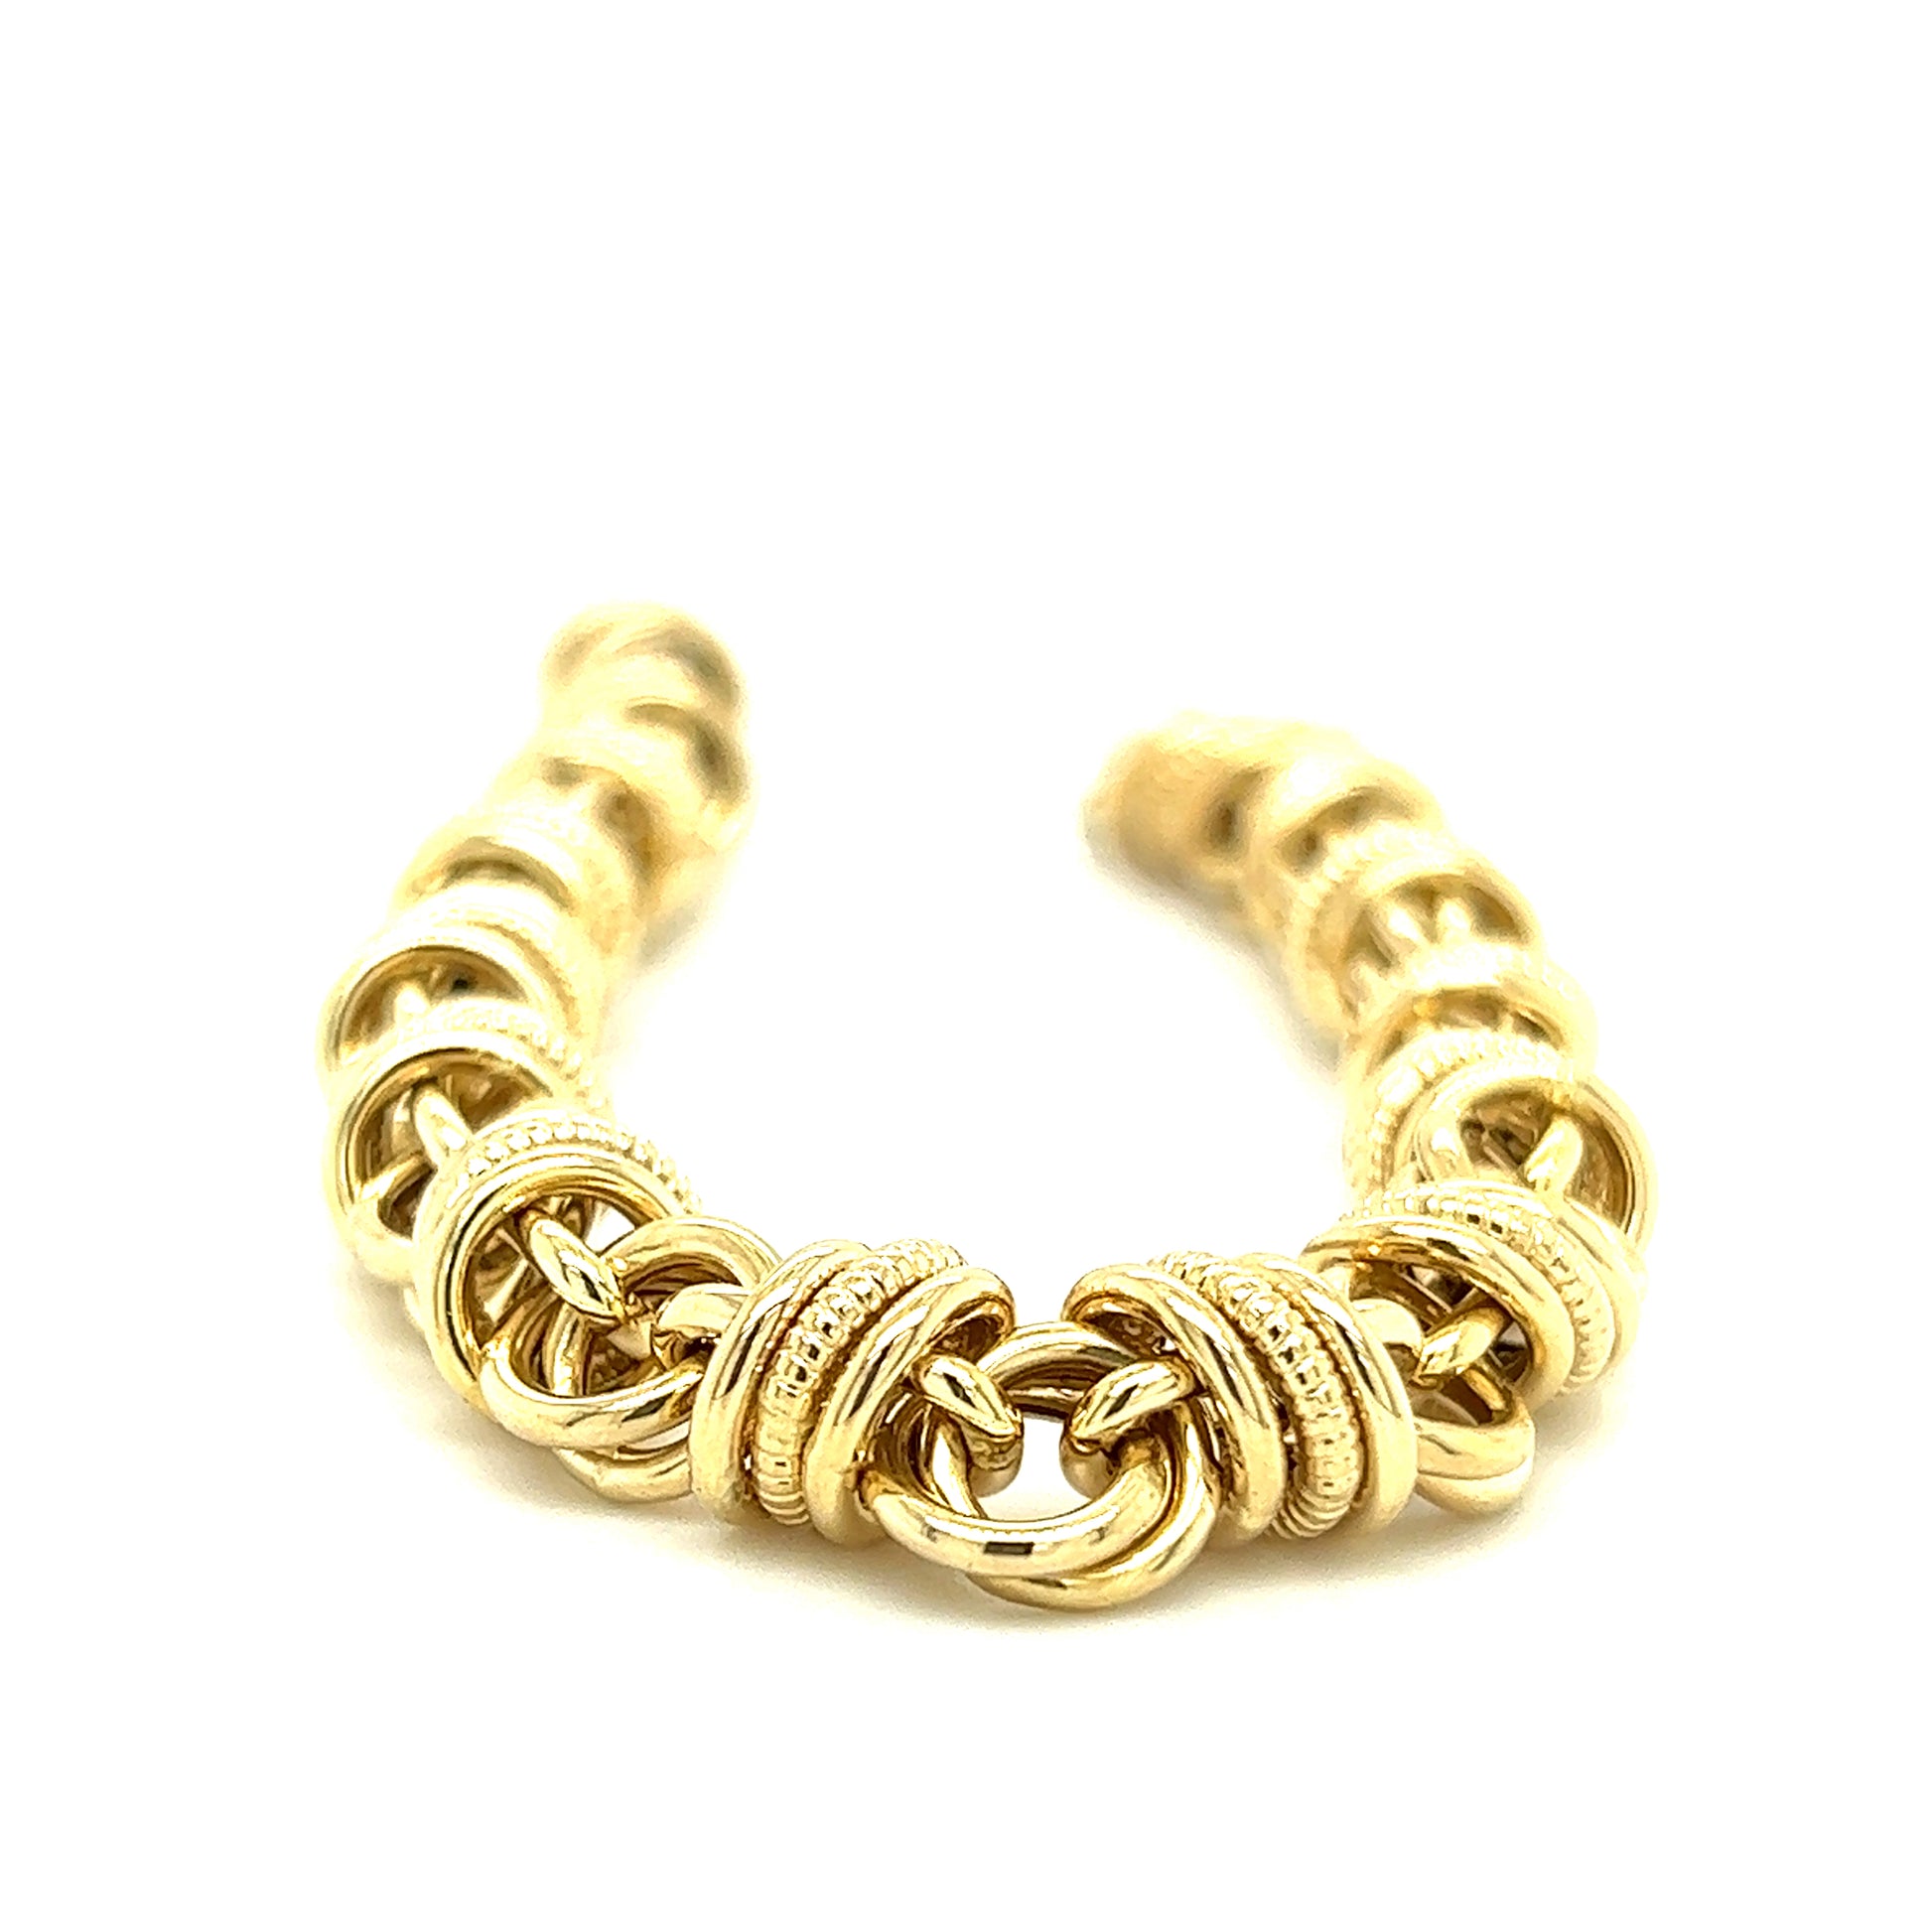 Double Link Bracelet with Loose Rings in 14K Yellow Gold Links View